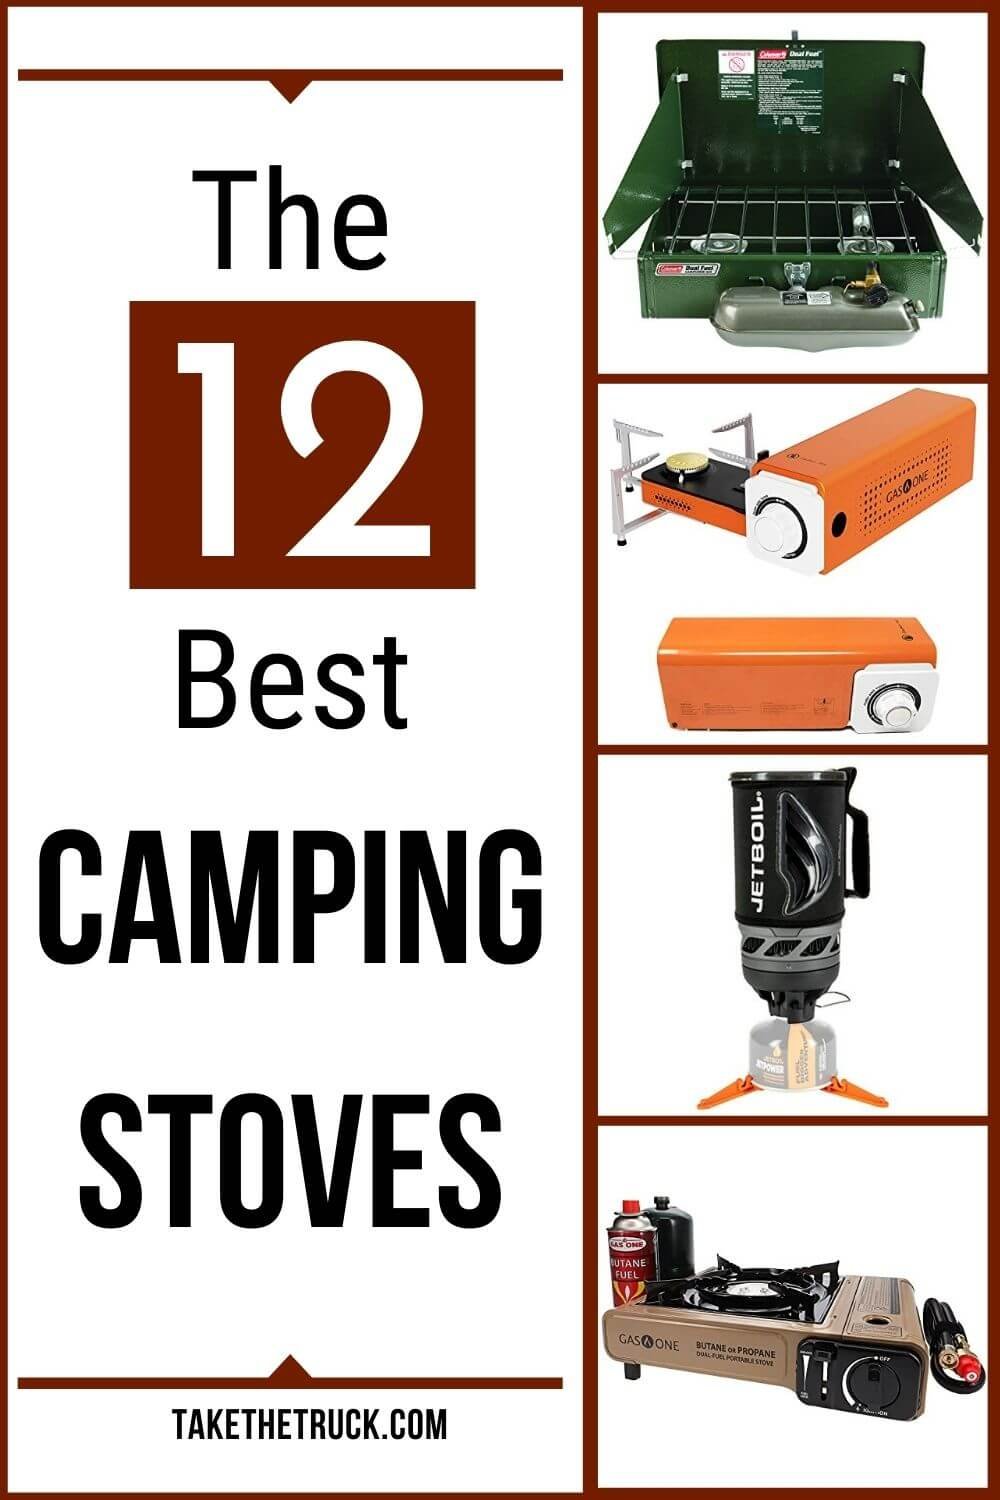 The 12 best camping stoves organized by fuel type: gas camp stoves, alcohol camp stoves, wood burning camp stoves, propane camping stoves, butane camping stoves, canister stoves for camping.